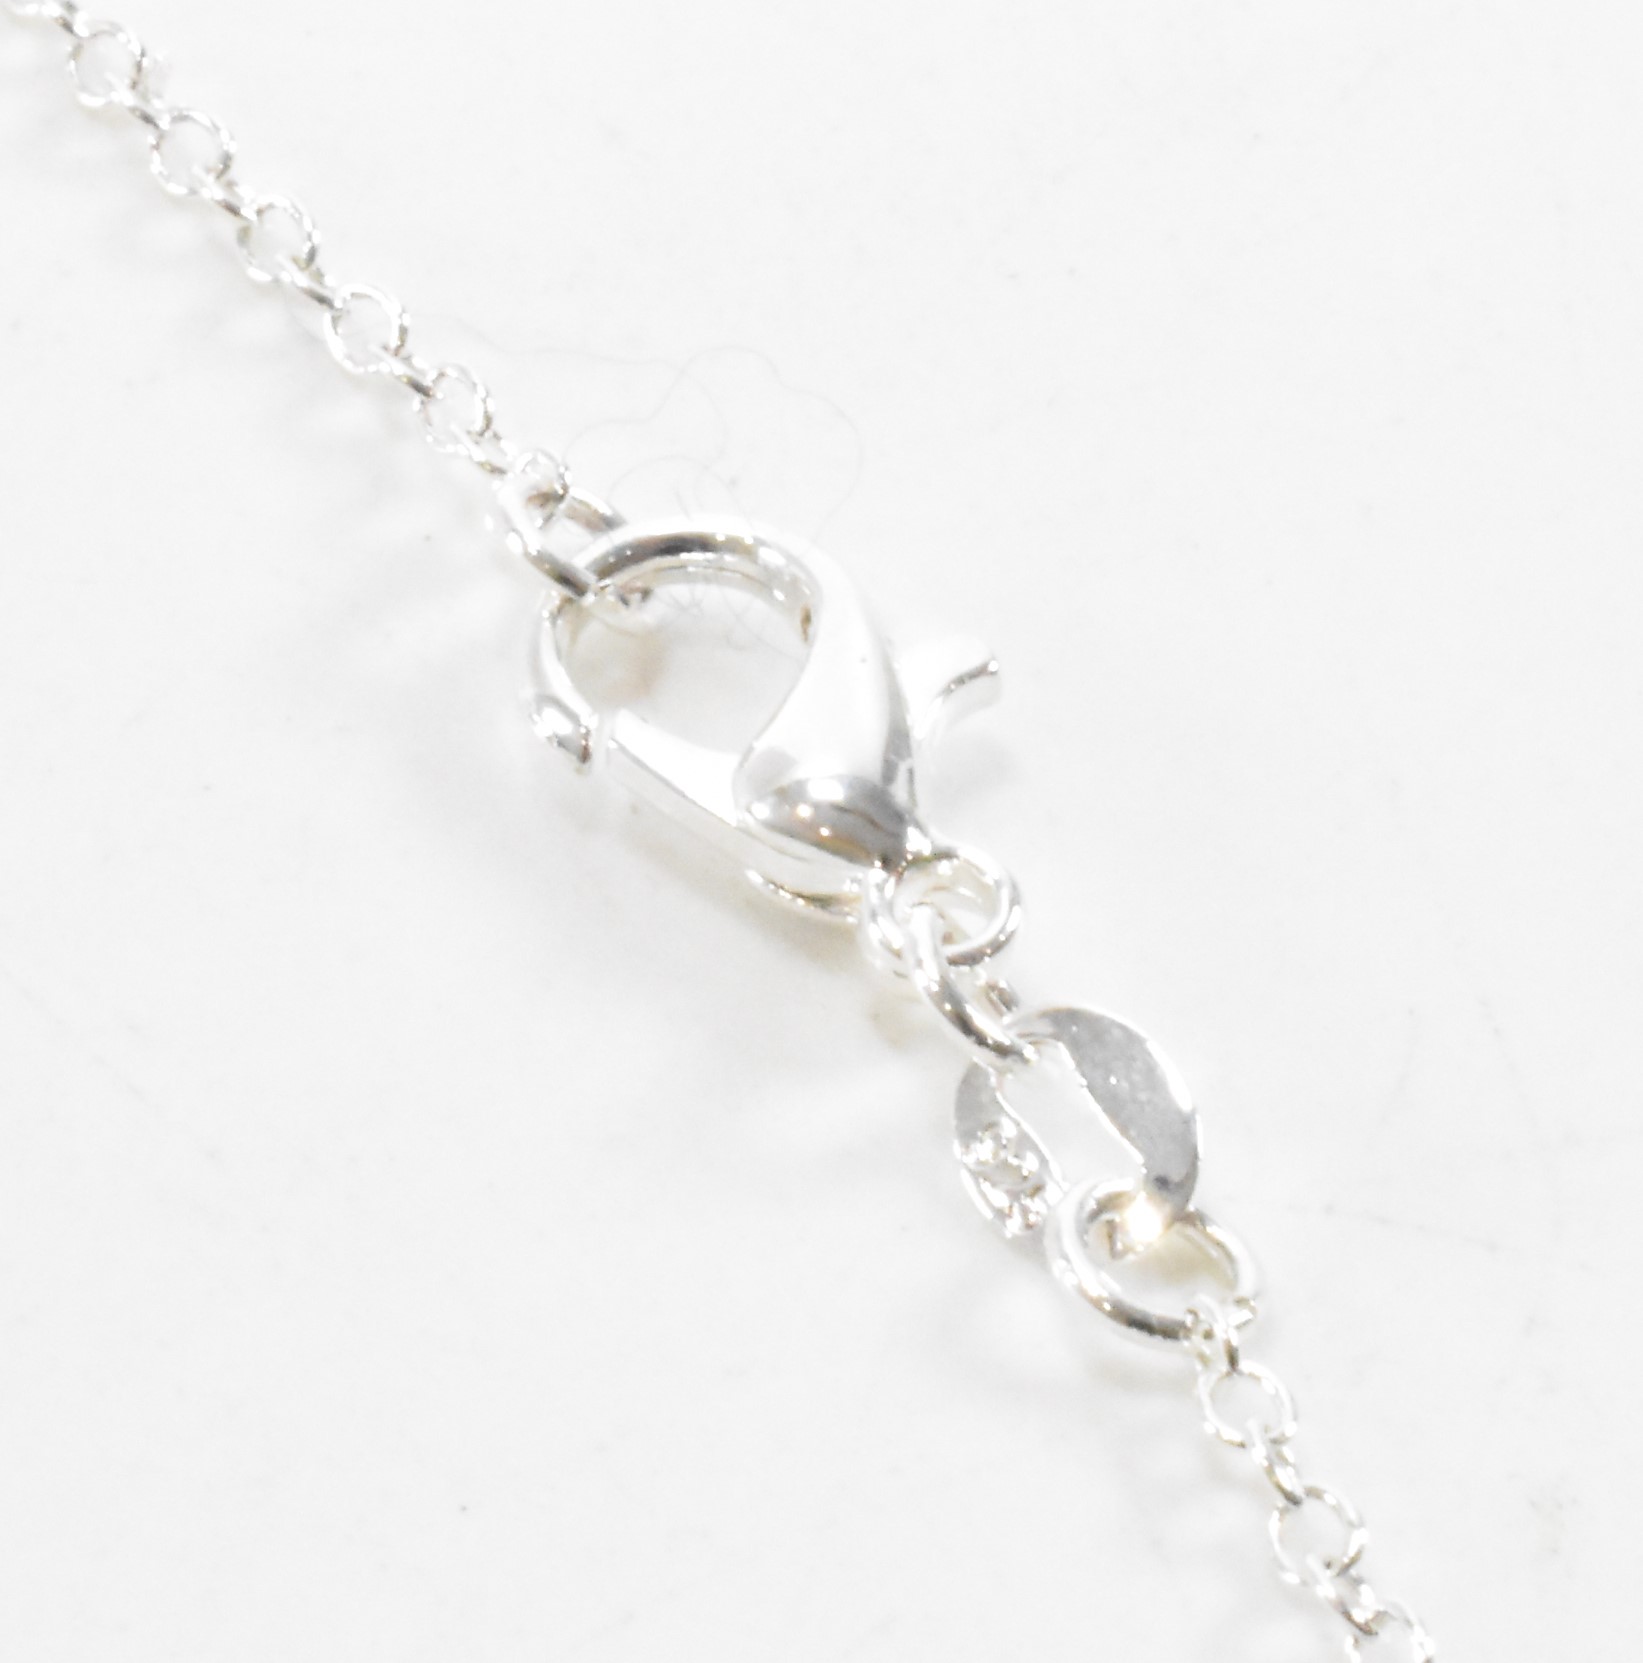 SILVER SKELETON PENDANT NECKLACE - Image 9 of 10